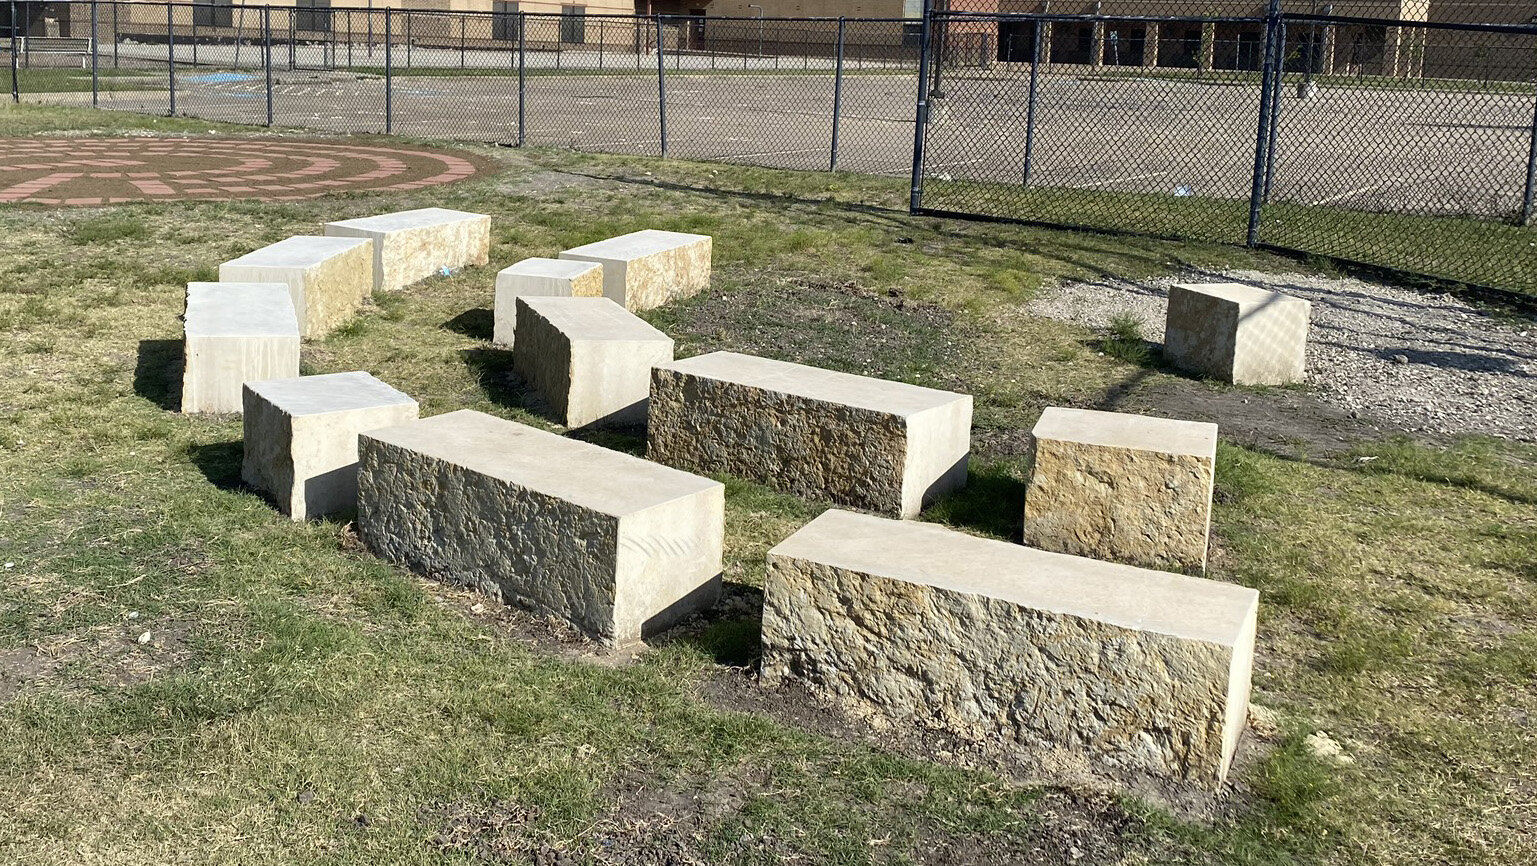  The Outdoor Learning areas are partially installed. Arturo Salazar Elementary School decided to utilize an unused backstop as the background to their group gathering area. 